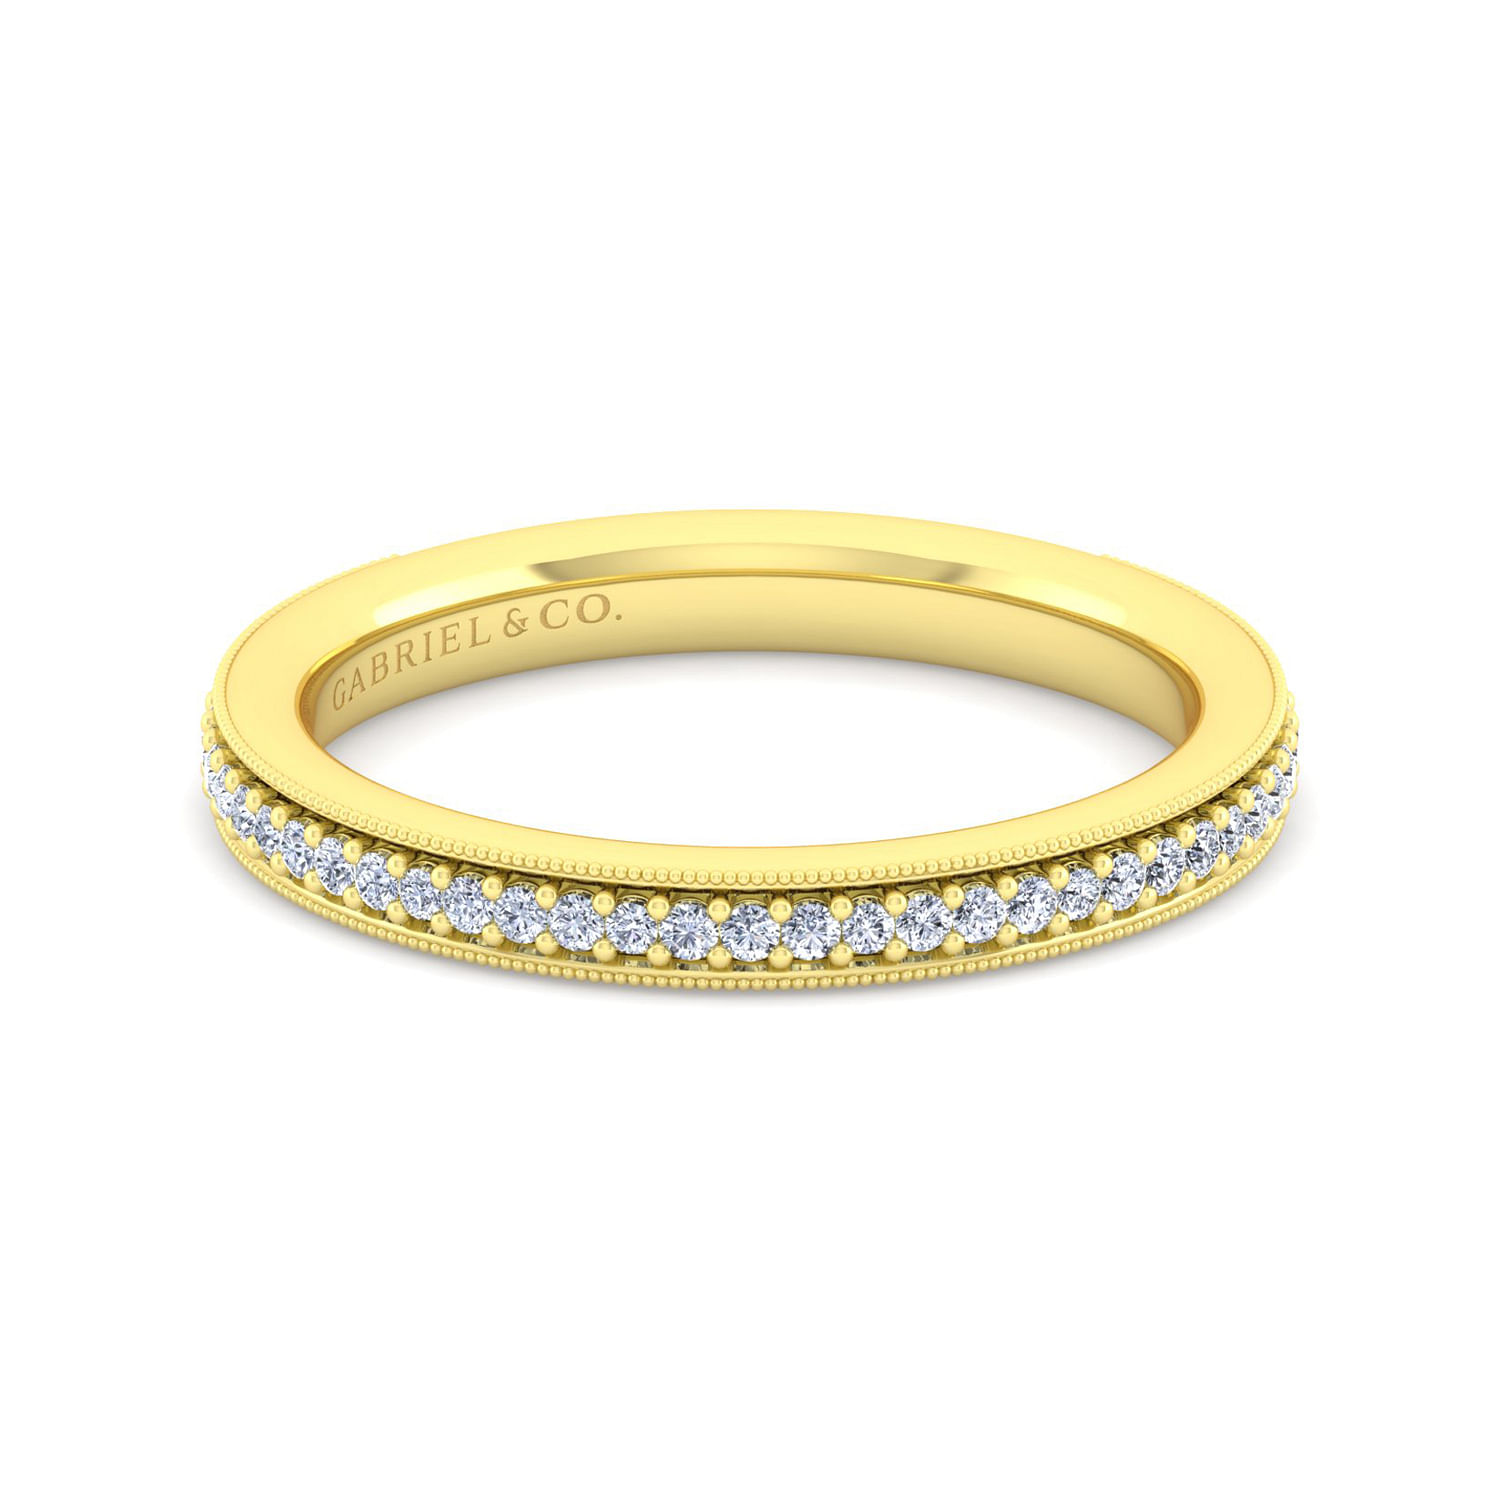 14K Yellow Gold Channel Prong Diamond Anniversary Band with Millgrain